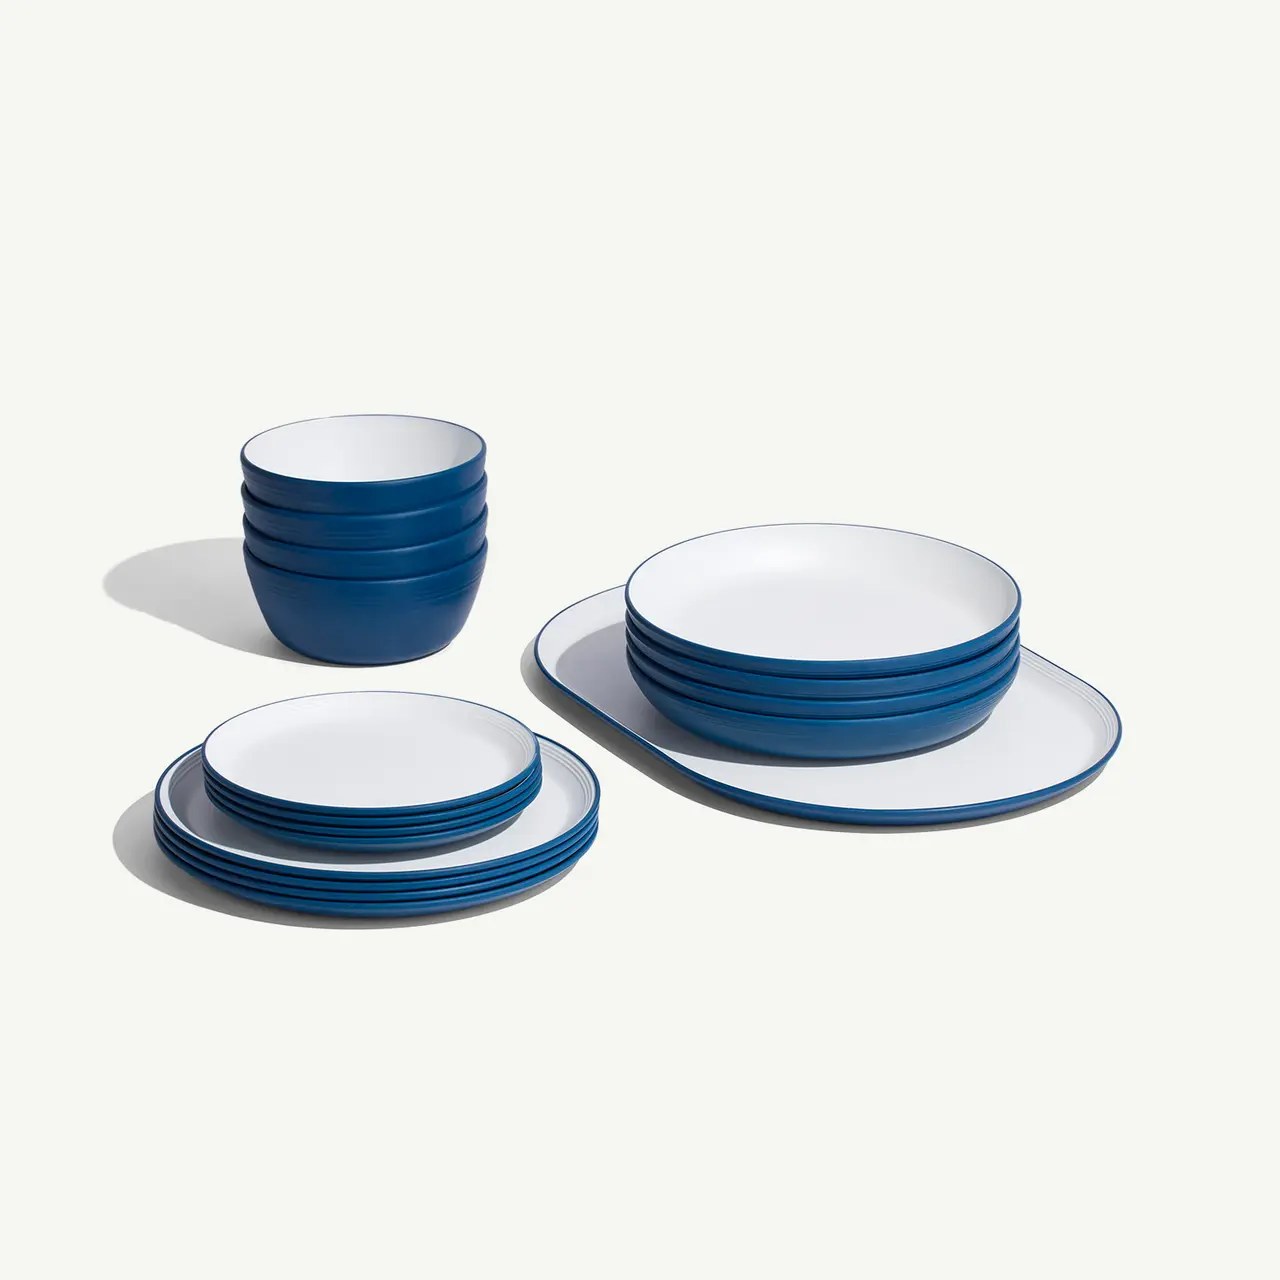 A set of blue-rimmed white dishes including stacked plates and bowls is neatly organized on a light surface.